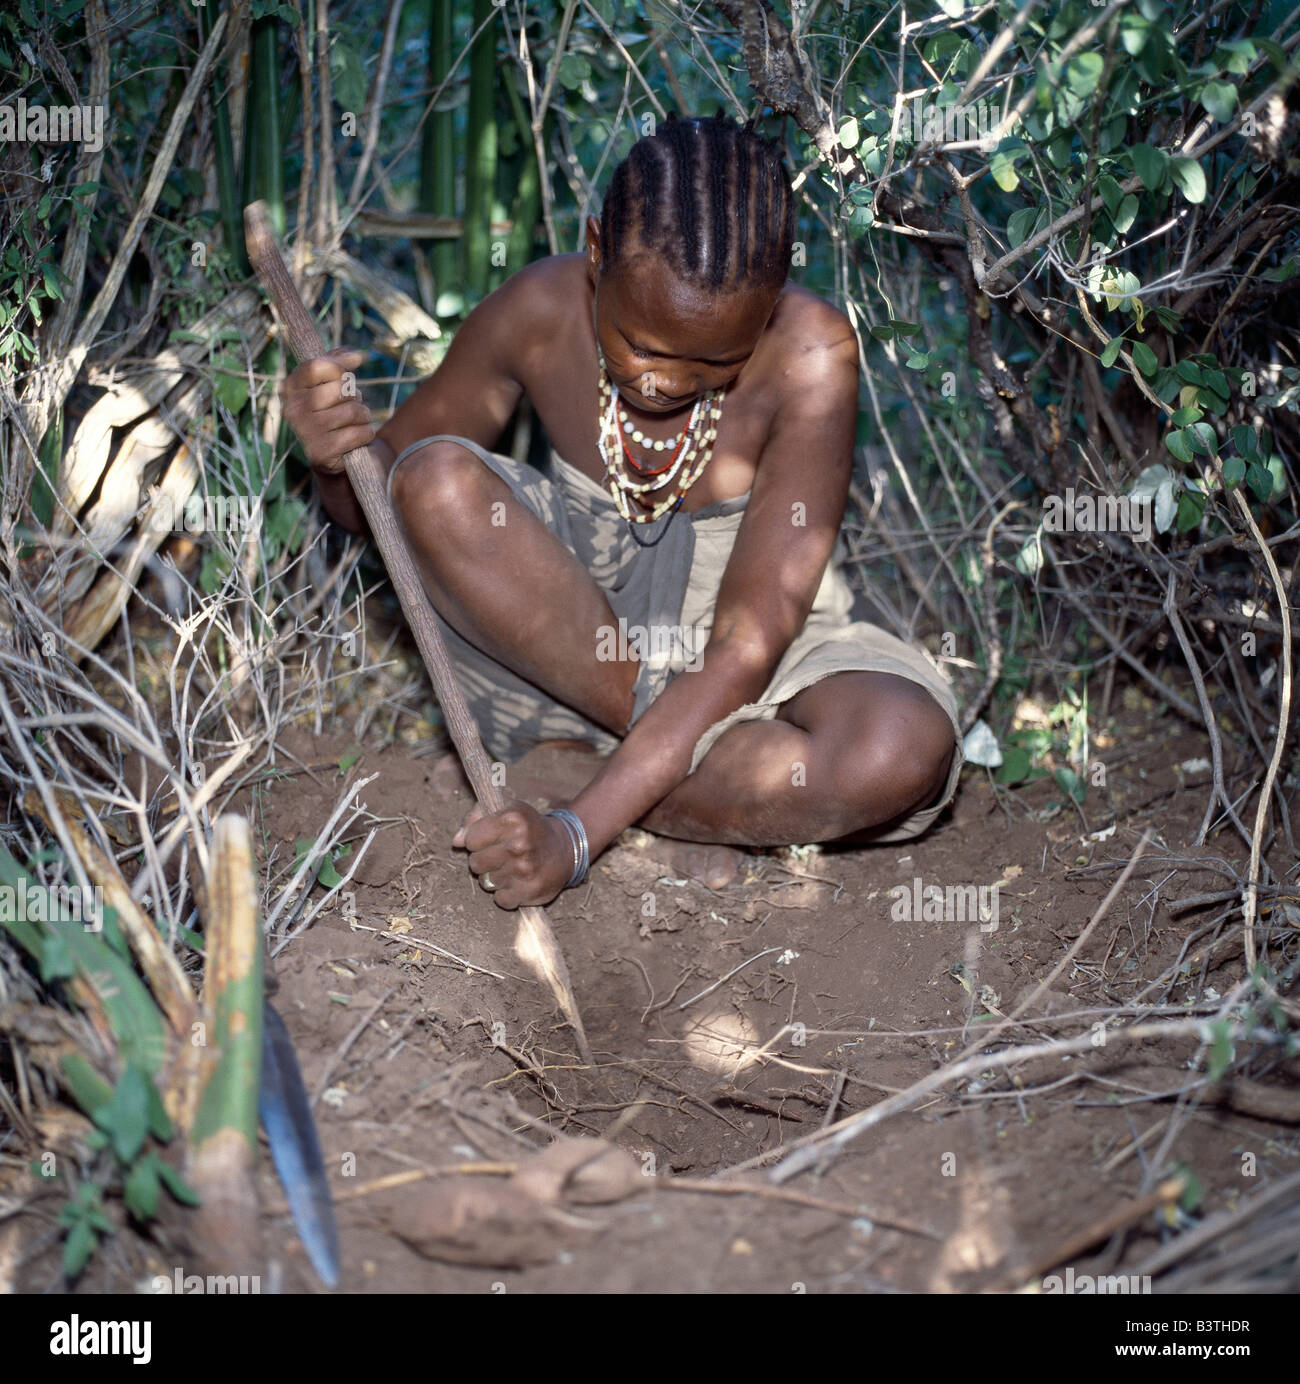 Tanzania, Arusha, Lake Eyasi. A Hadza woman digs for edible tubers with a digging stick.The Hadzabe are a thoUSAnd-strong community of hunter-gatherers who have lived in the Lake Eyasi basin for centuries. They are one of only four or five societies in the world that still earn a living primarily from wild resources. Stock Photo